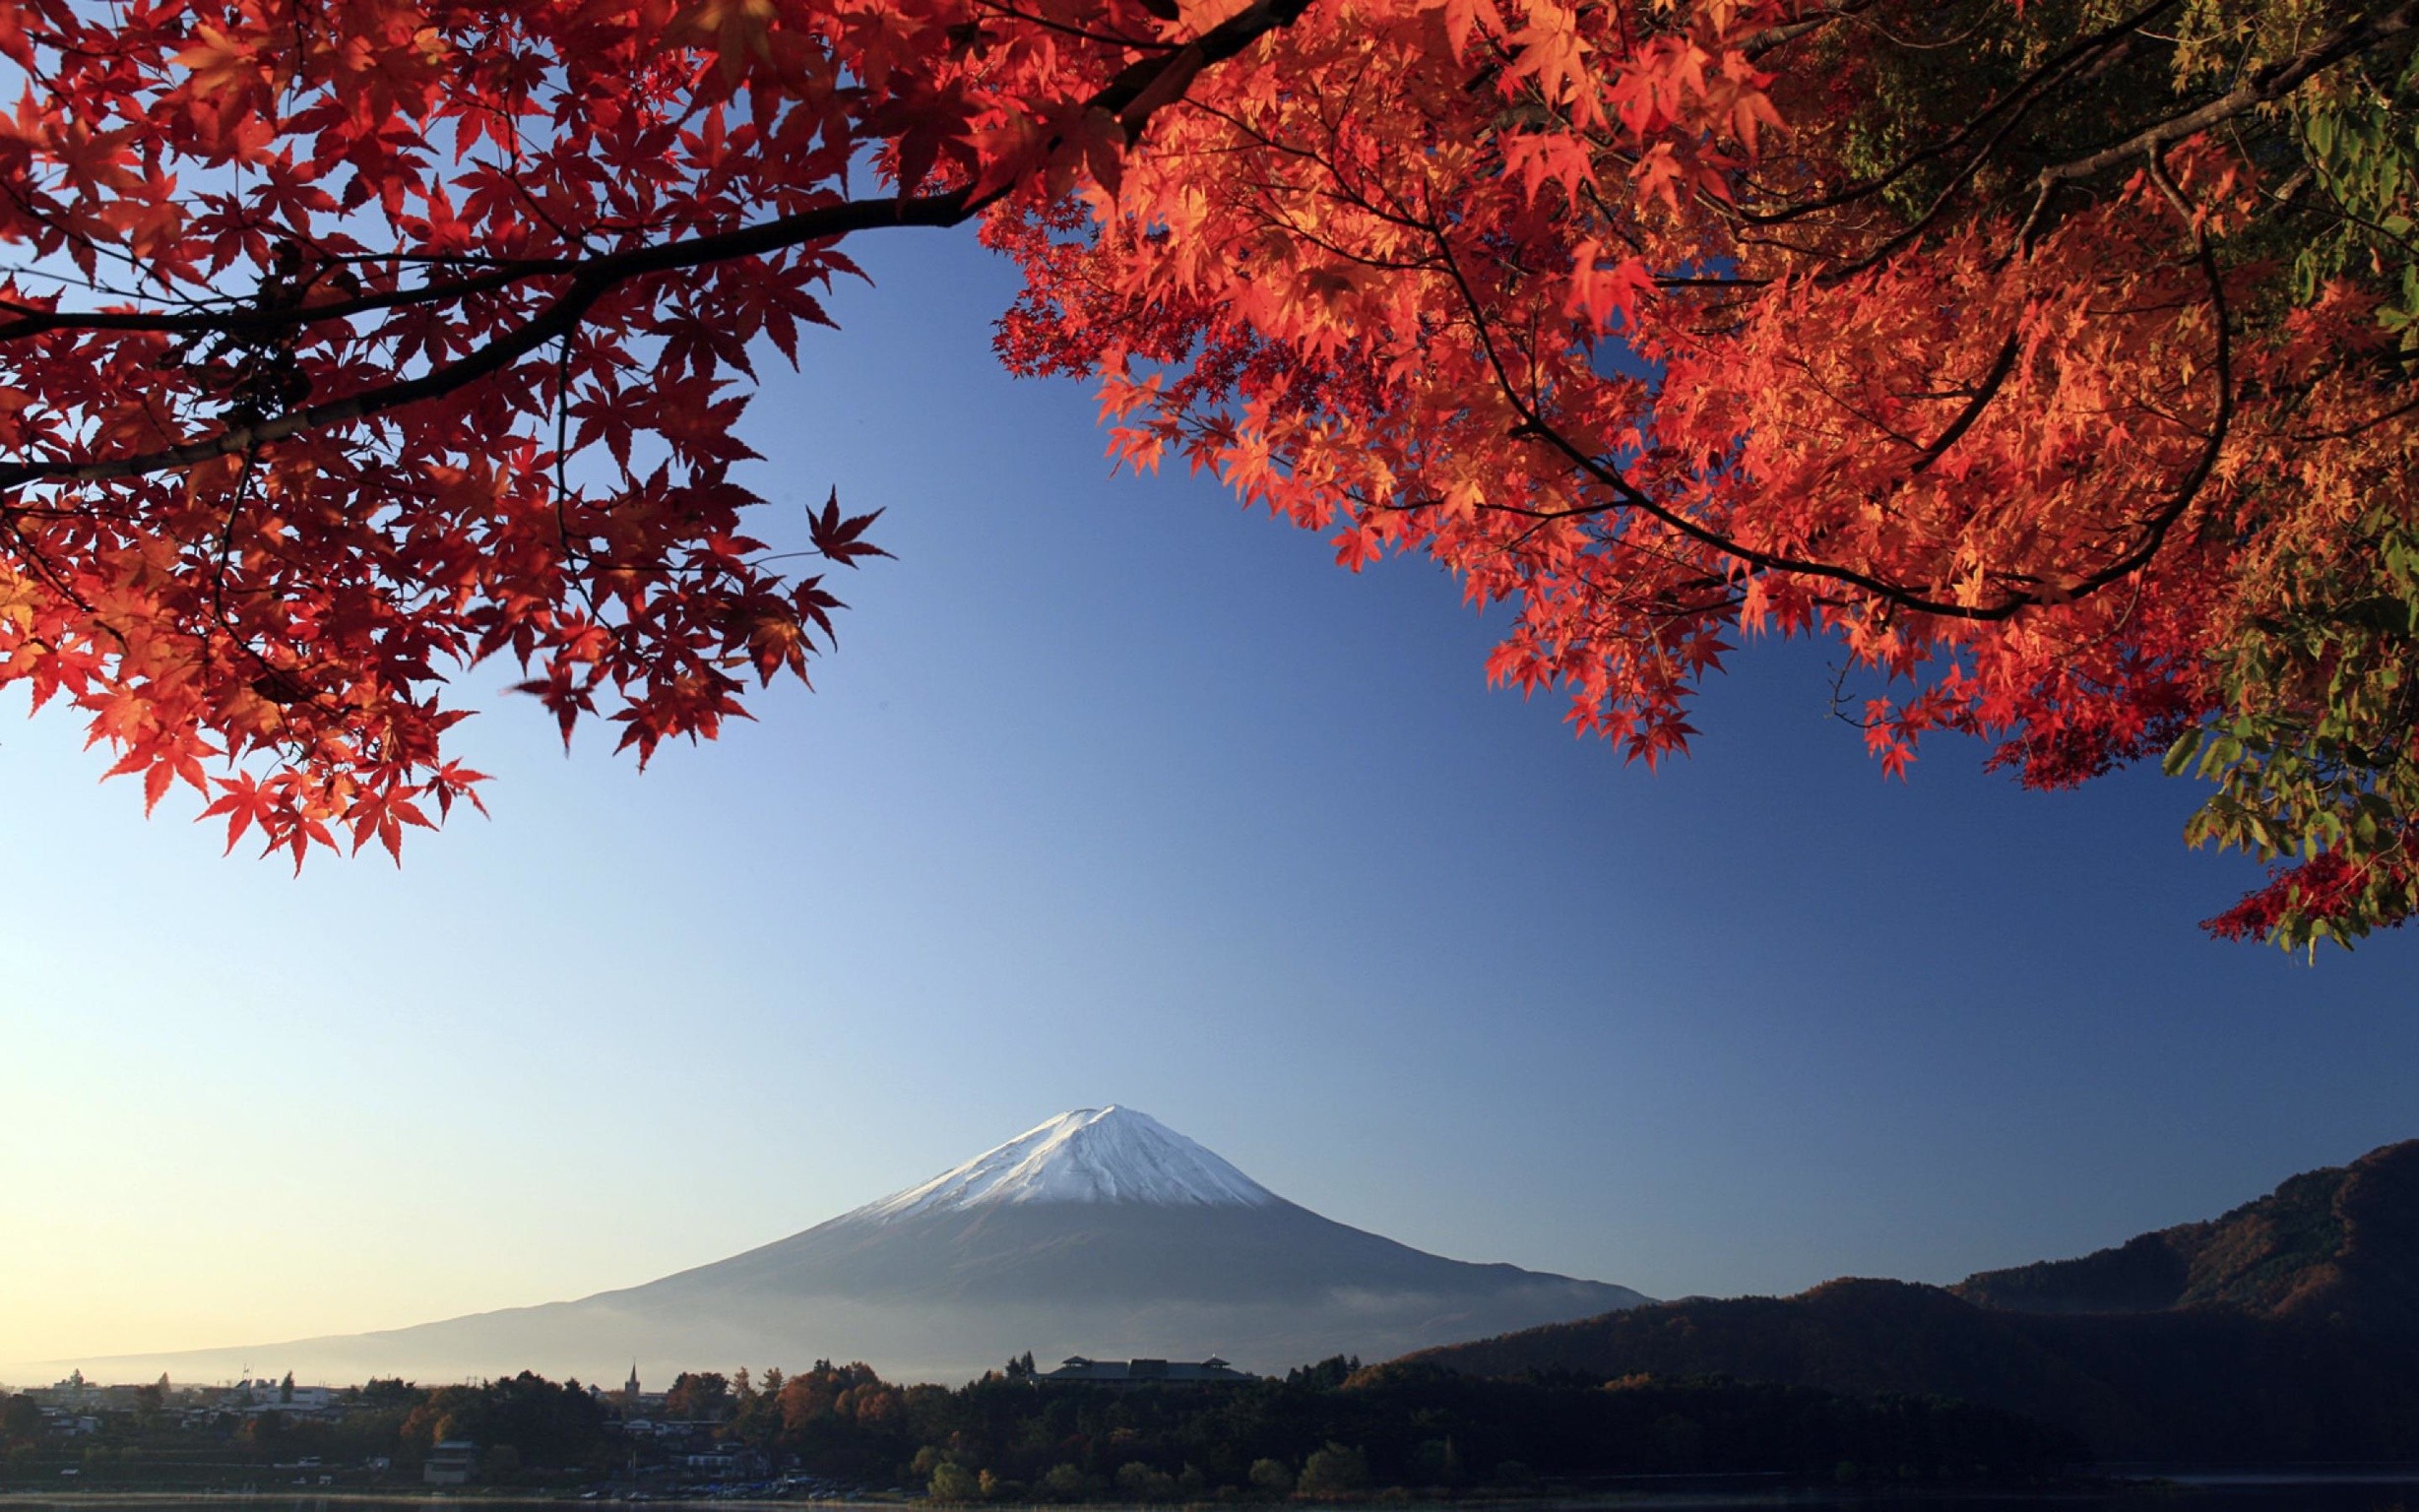 General 2457x1536 Mount Fuji Japan fall leaves mountains volcano Asia